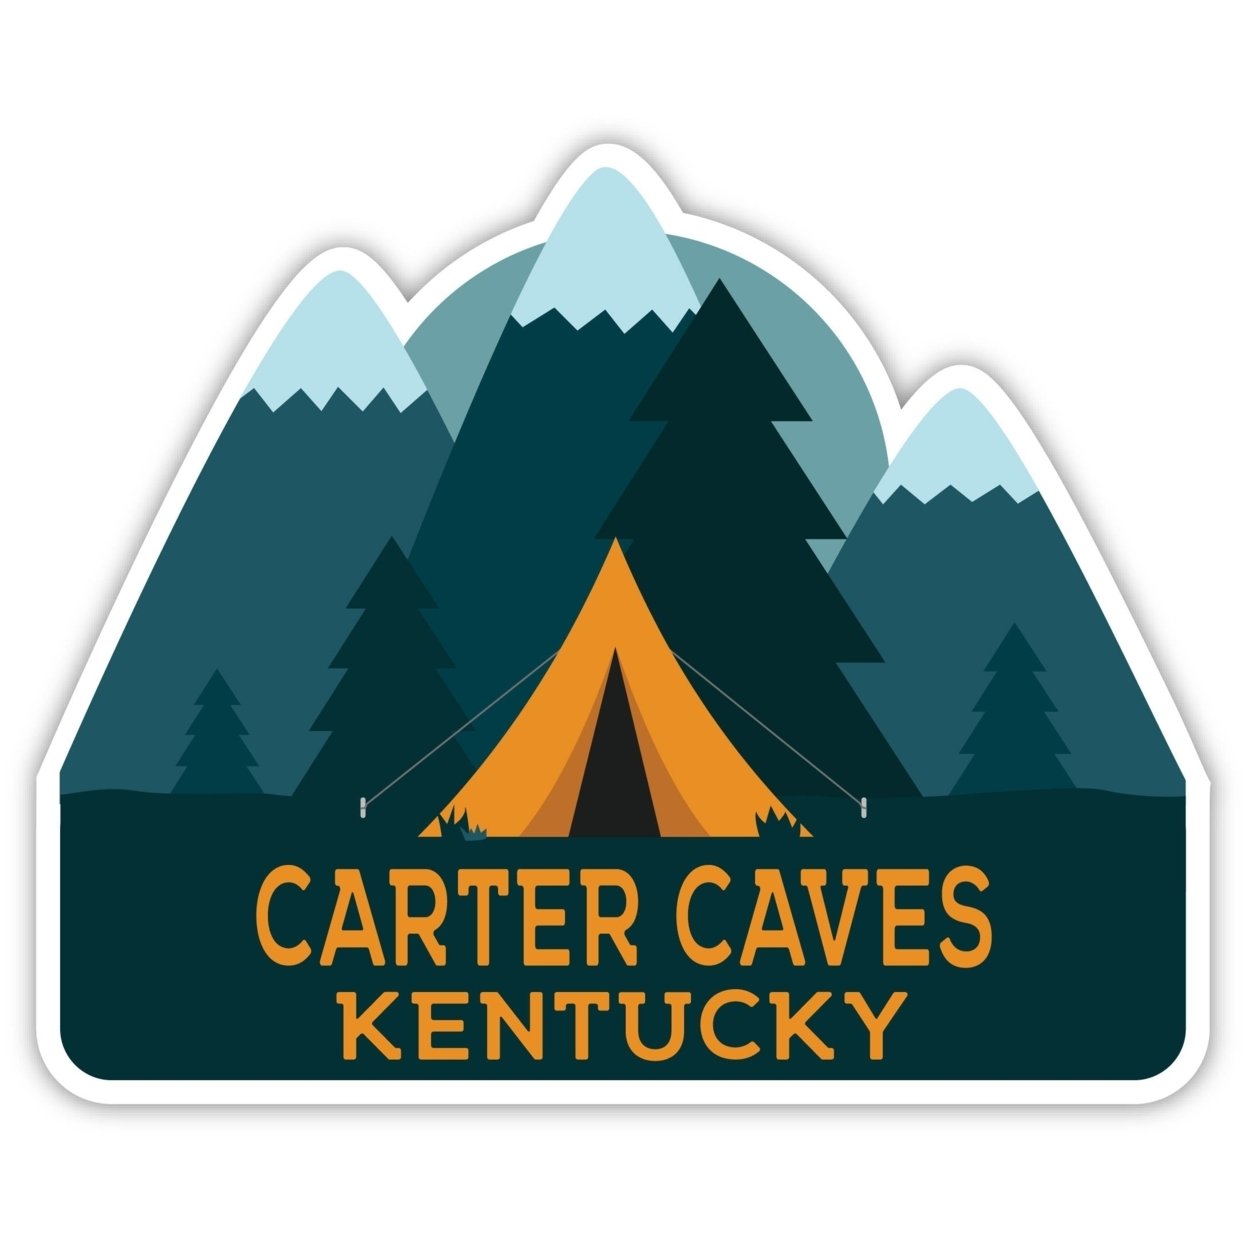 Carter Caves Kentucky Souvenir Decorative Stickers (Choose Theme And Size) - 4-Pack, 12-Inch, Tent